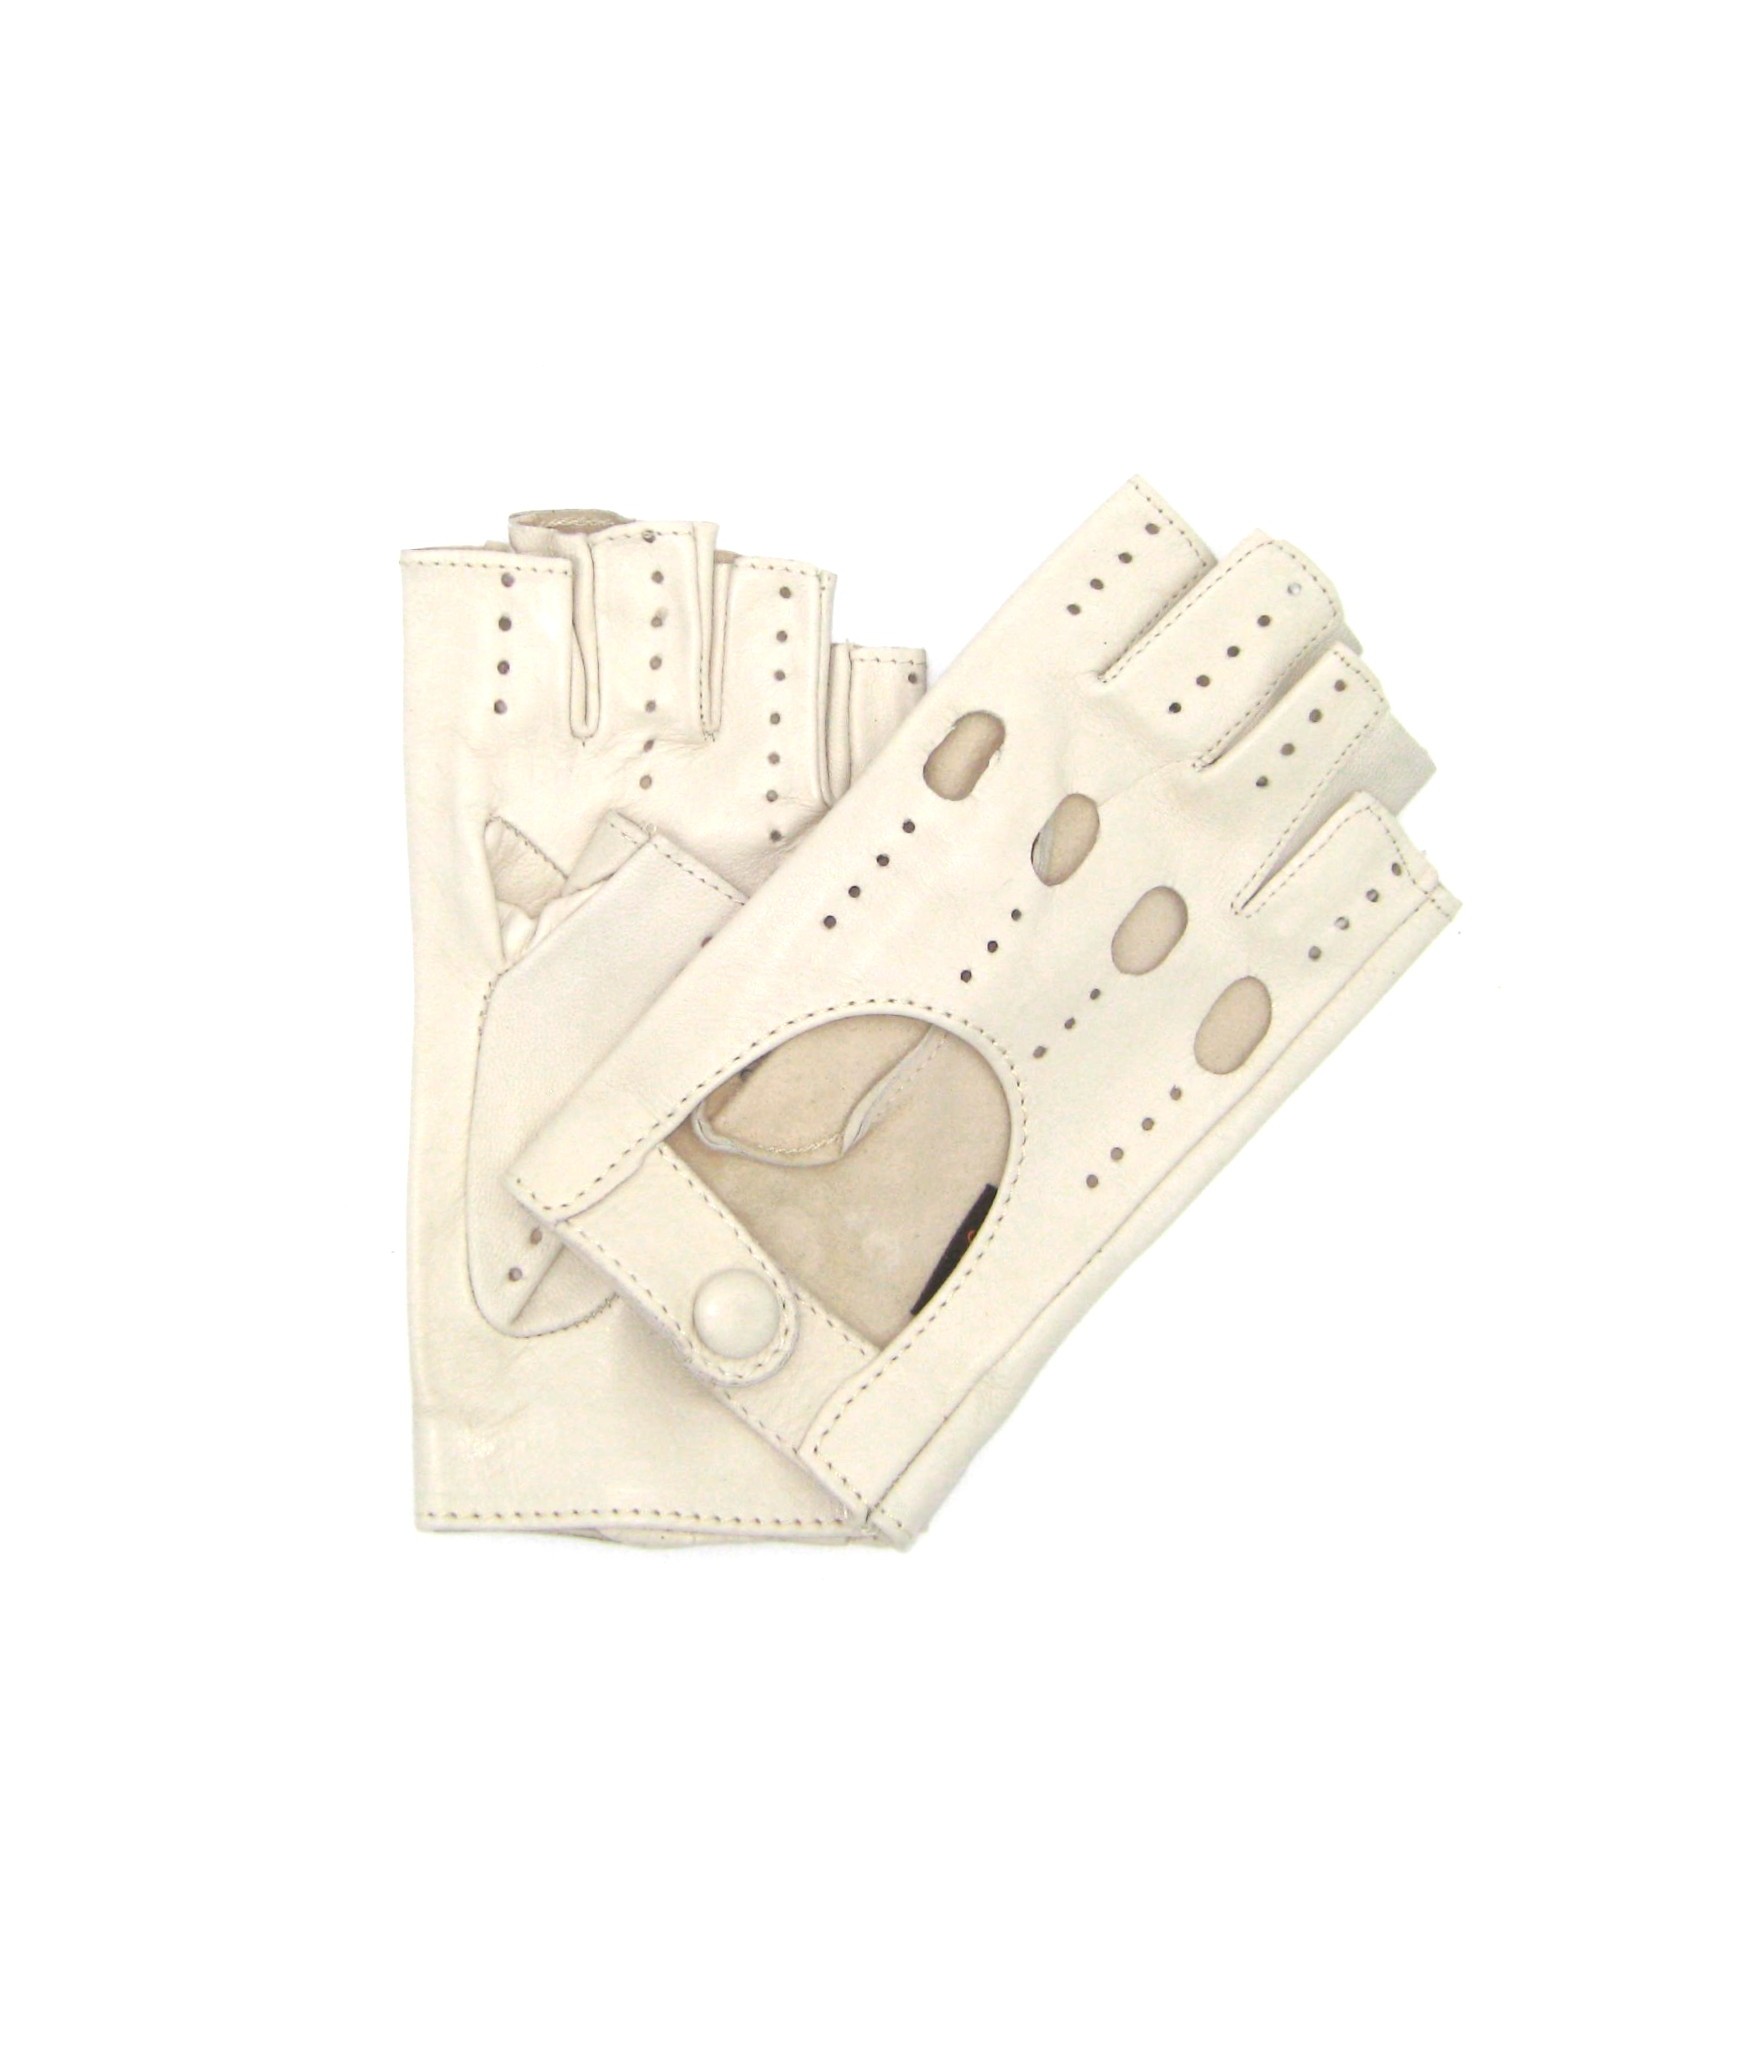 Driving gloves in Nappa Leather fingerless    Cream